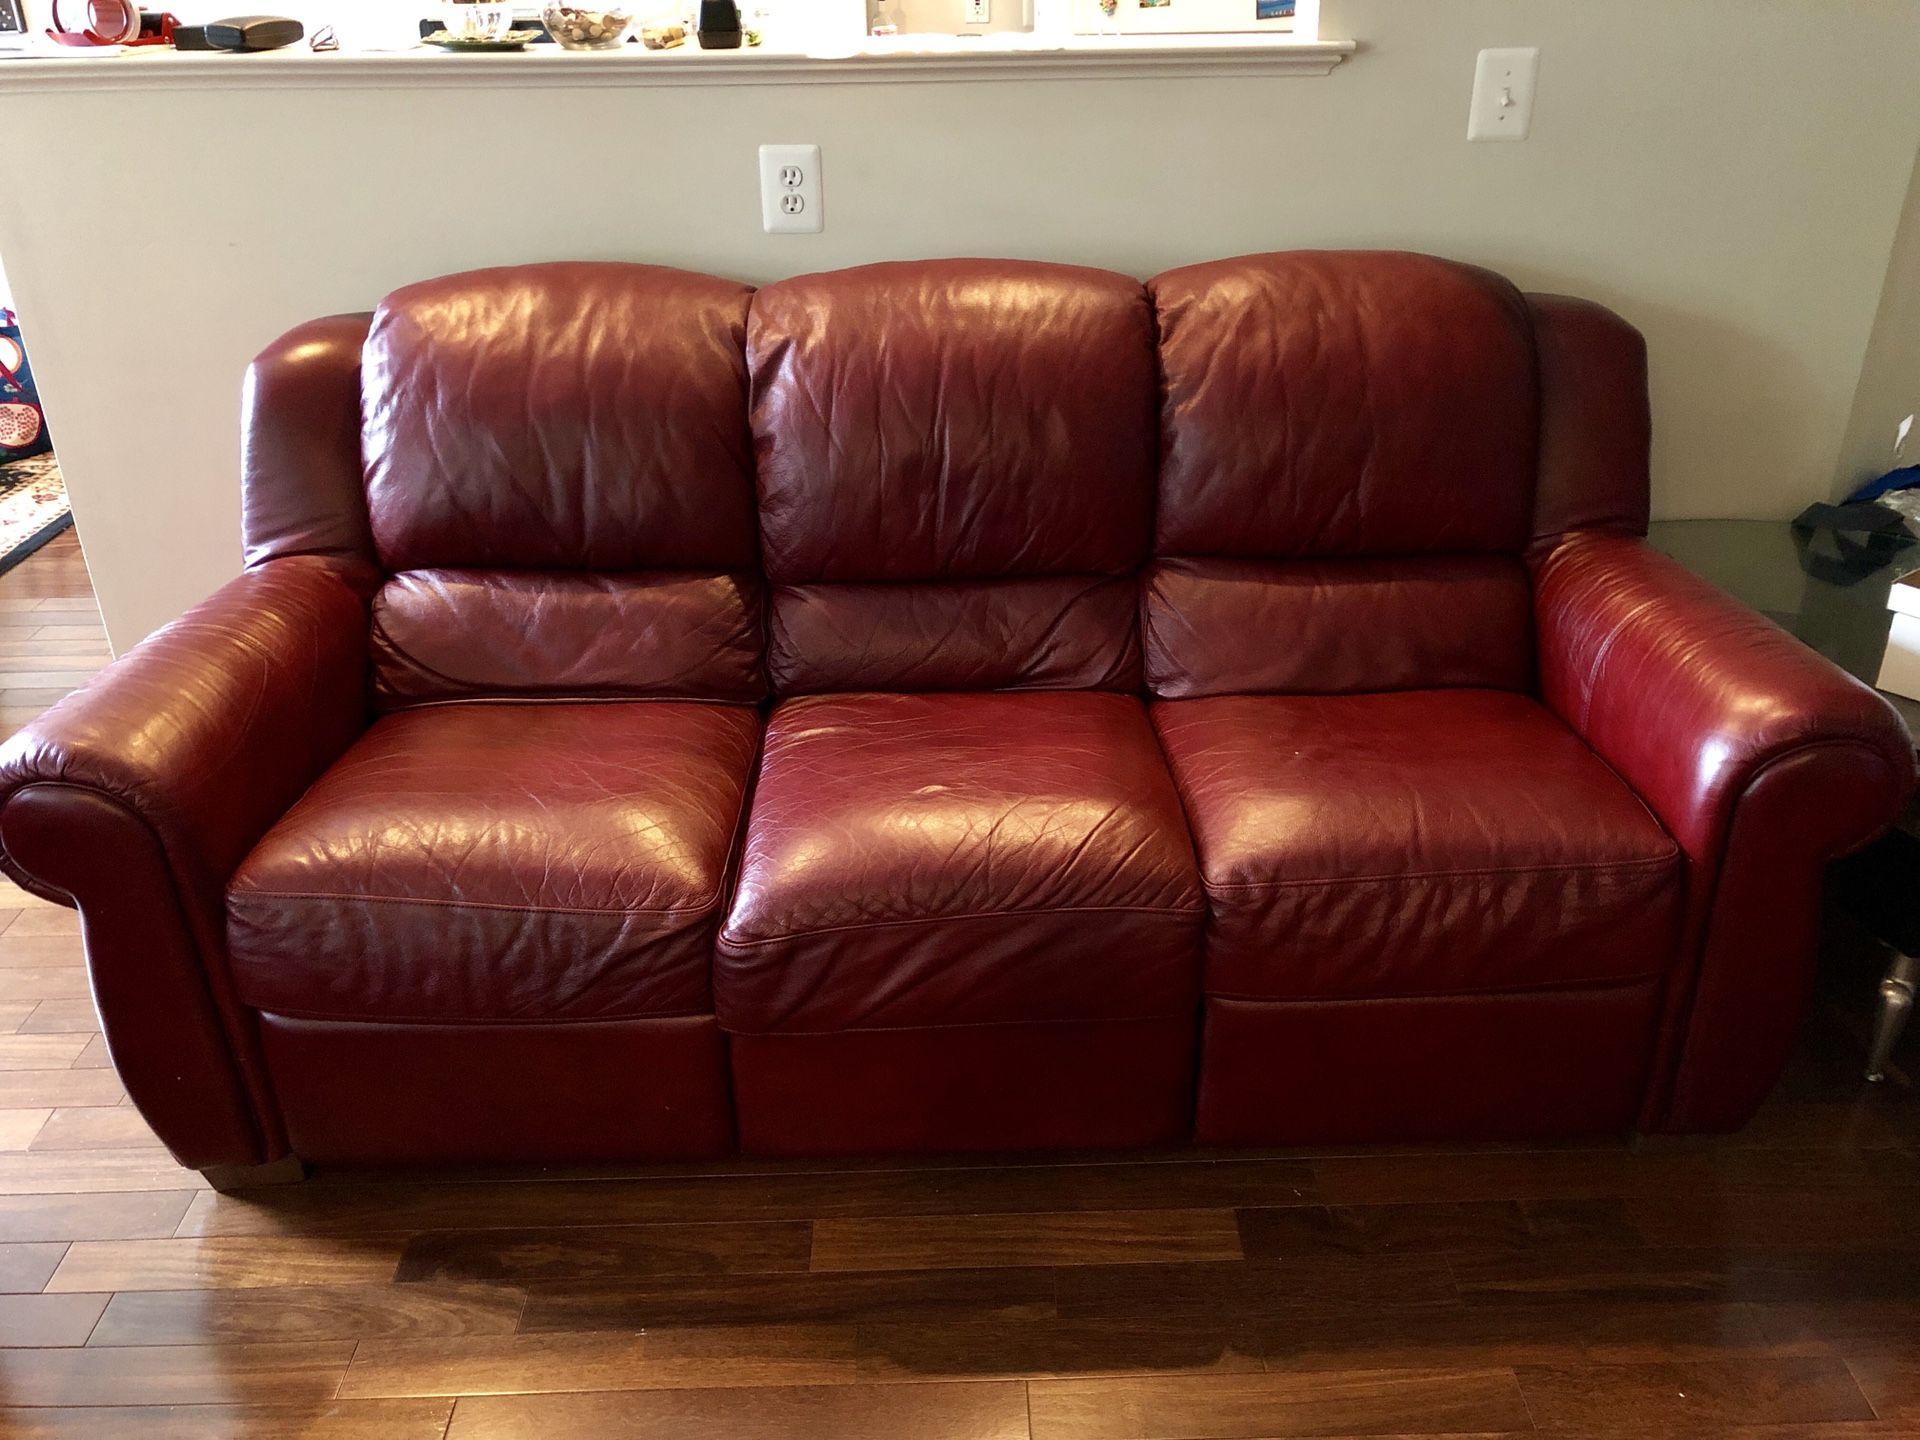 Two 3-seat Italian leather recliner sofas